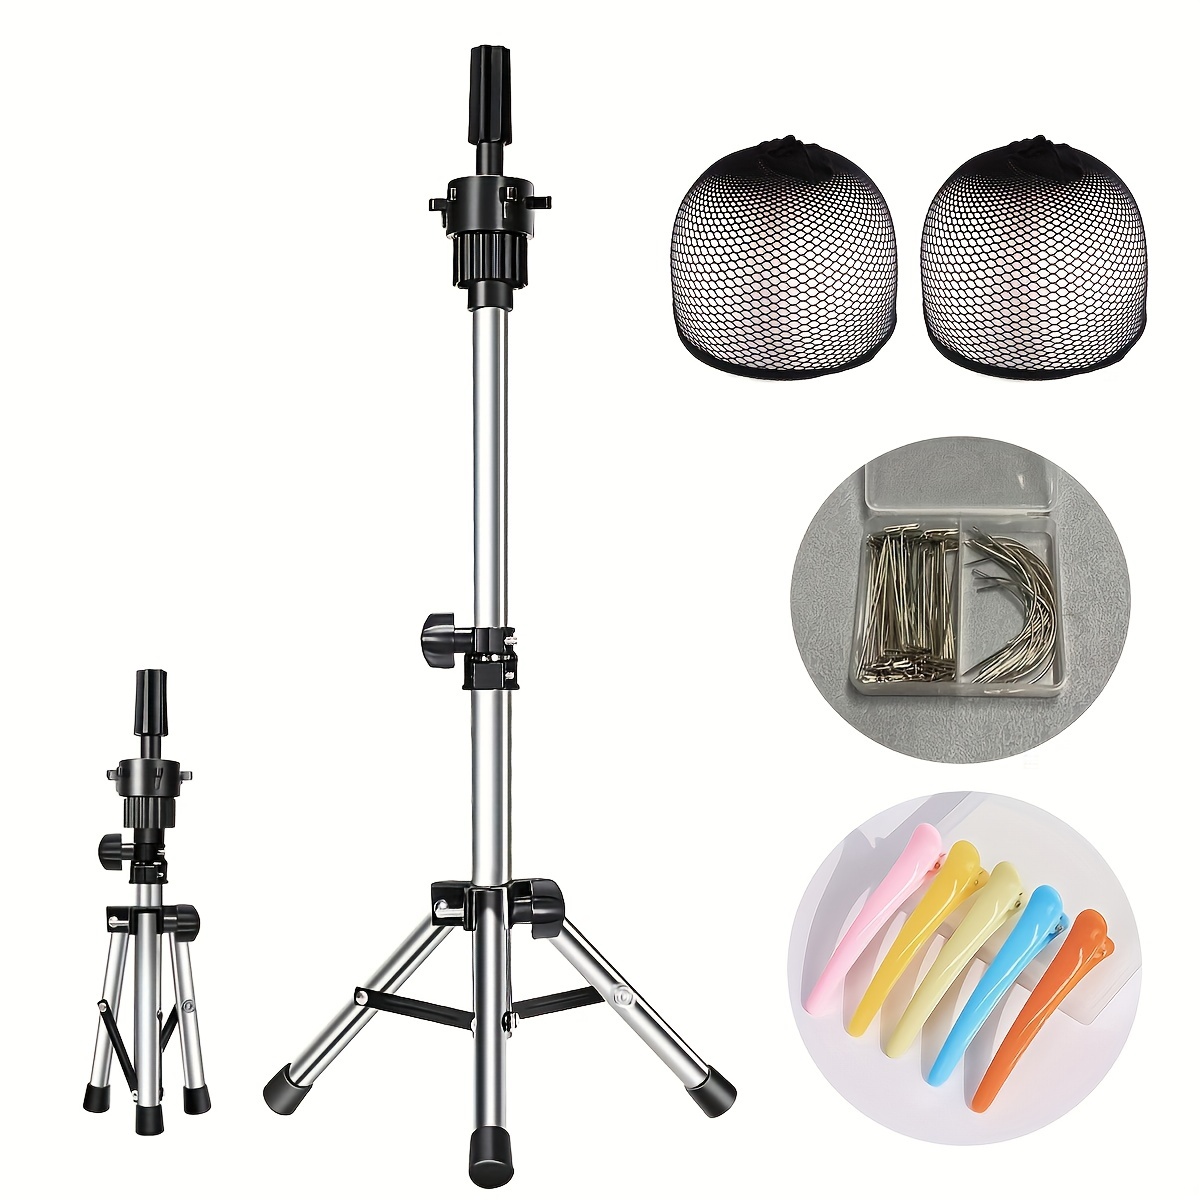 Tripod Mini Mannequin Head Stand, Wig Stand Tripod Adjustable (36.83-55.37  Cm) For Mannequin Heads Training Heads